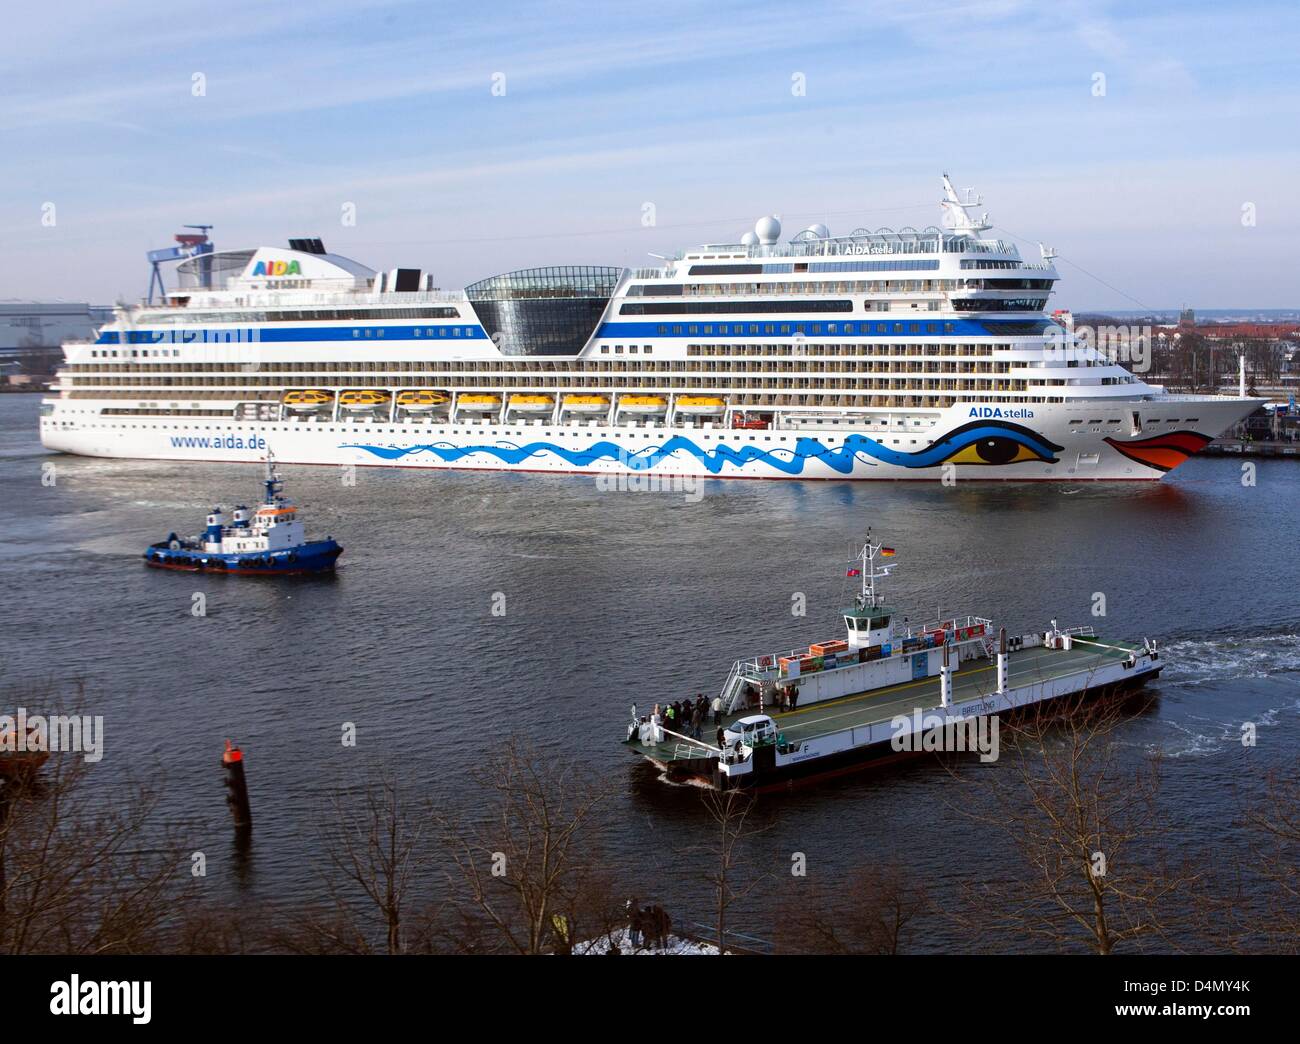 The newly built cruise ship 'AIDAstella' arrives to the port of Rostock, Germany, 16 March 2013. The new 2.200 passenger club ship has 14 decks and equals her sister ships AIDAblu, AIDAsol and AIDAmar also in respect to size. Photo: Jens Buettner Stock Photo